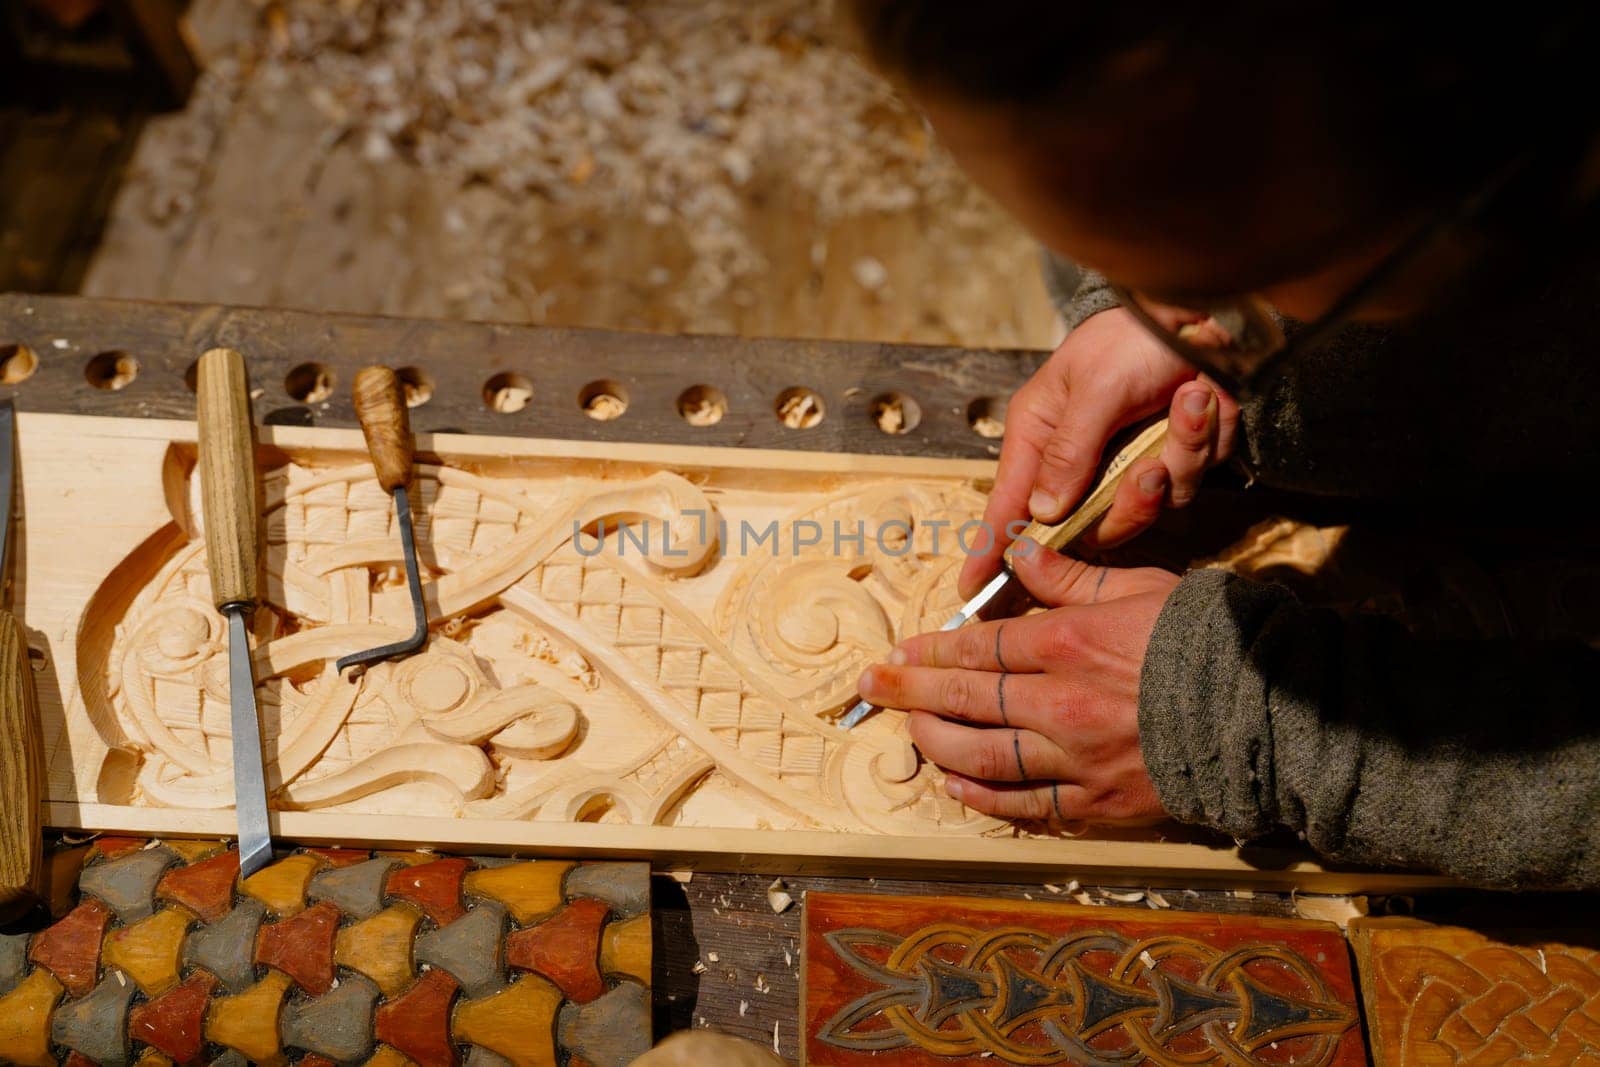 Skilled Carpenter Carving Intricate Designs on Wood for Artisanal Creations by PhotoTime